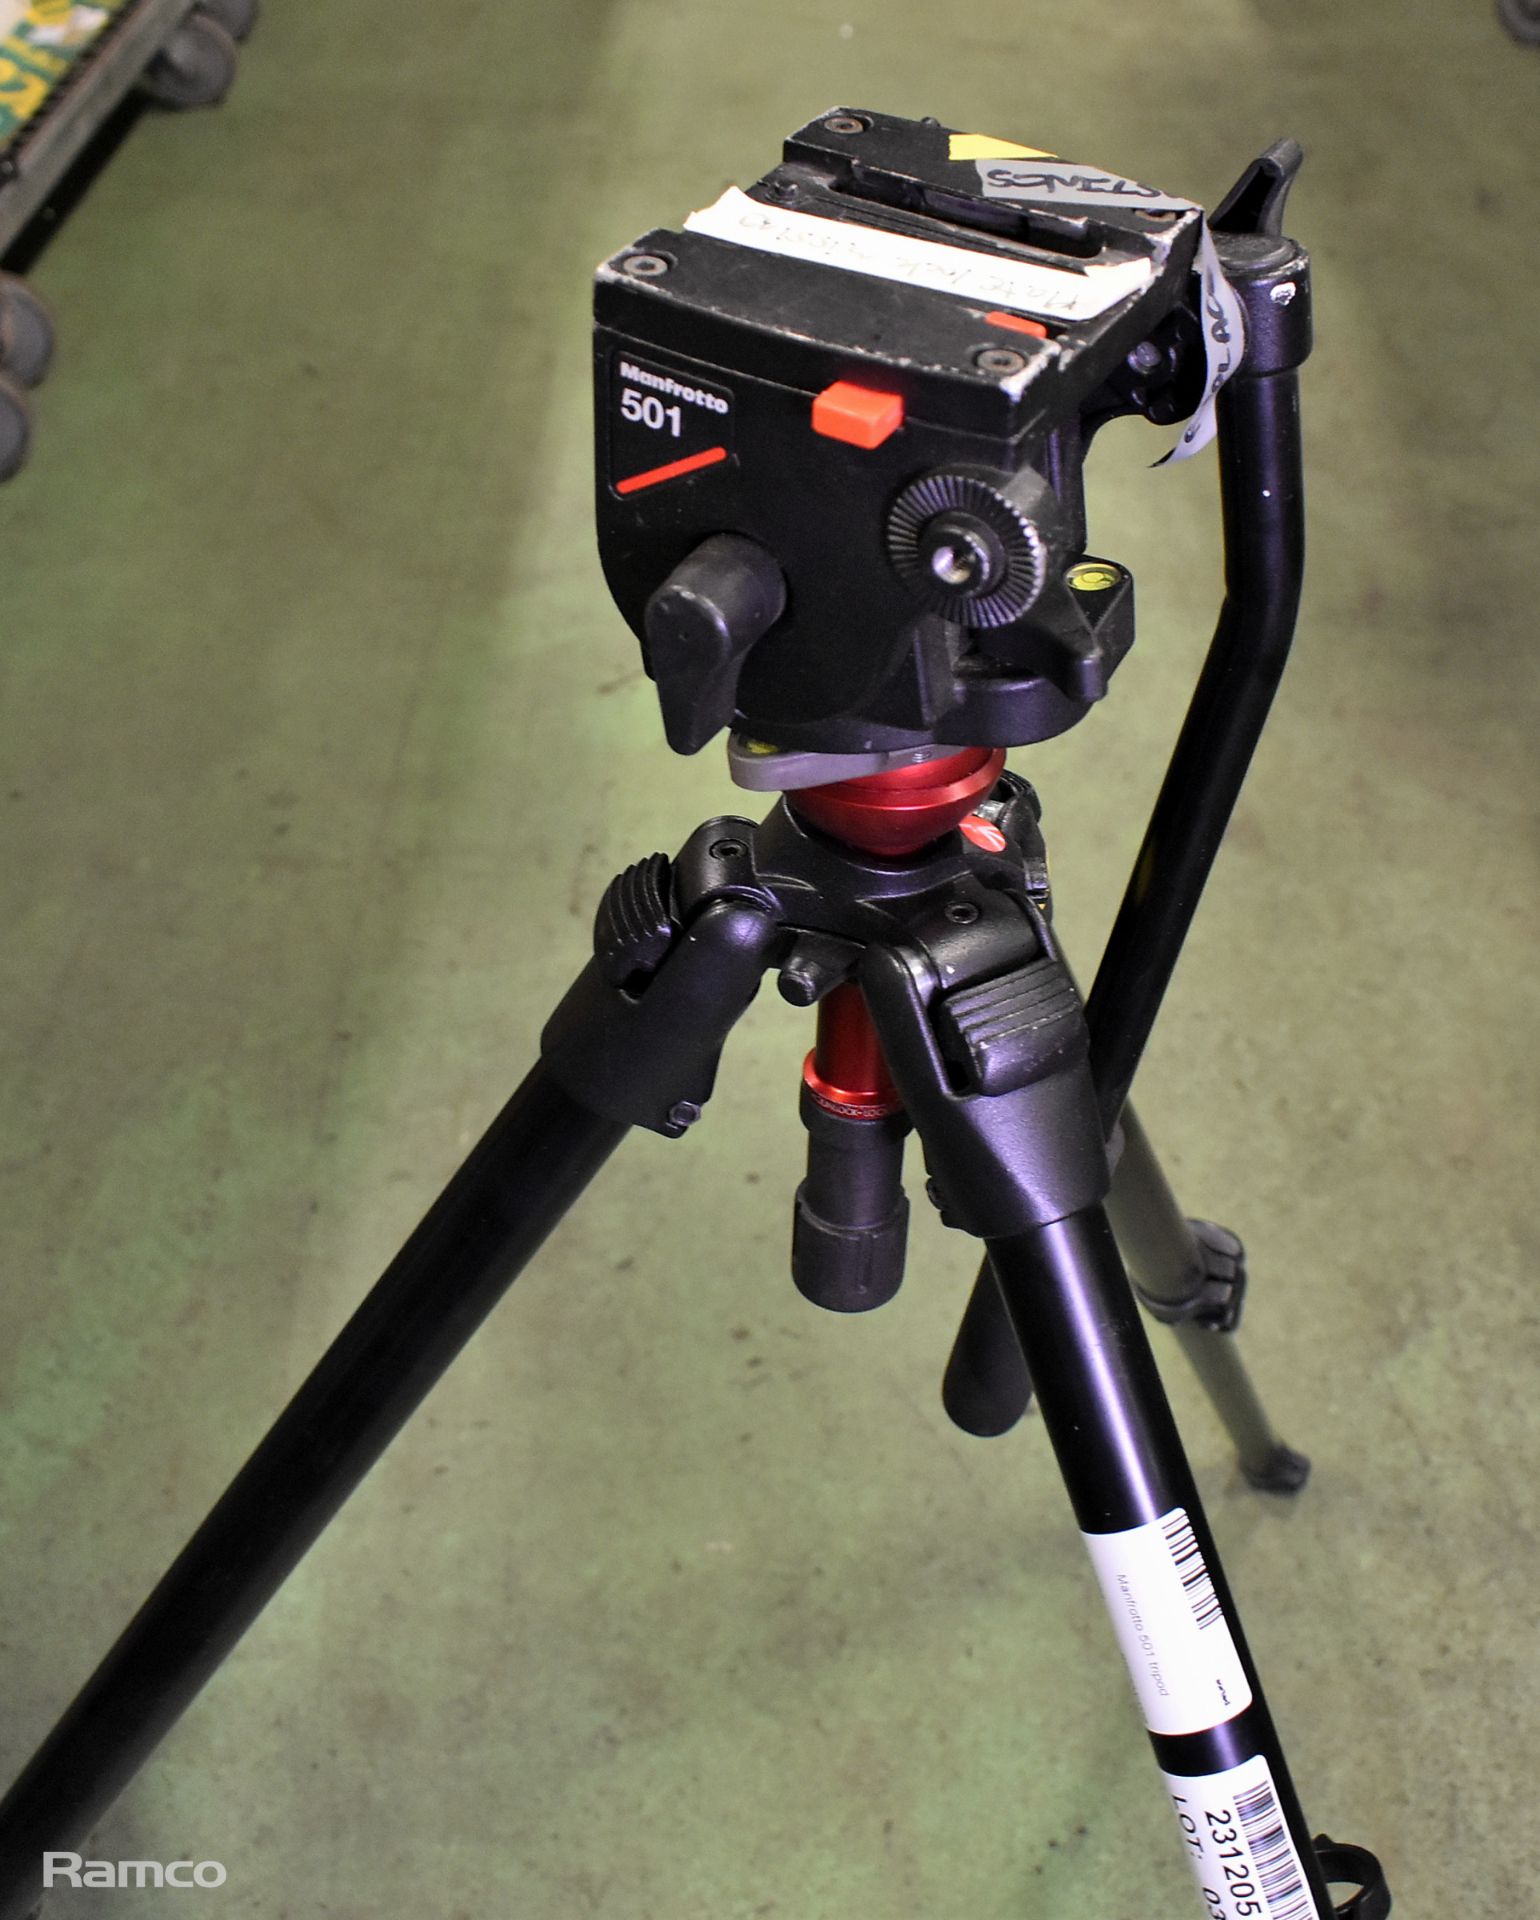 Manfrotto 745B tripod with Manfrotto 501 head - ONE LEG SECTION MISSING - Image 6 of 7